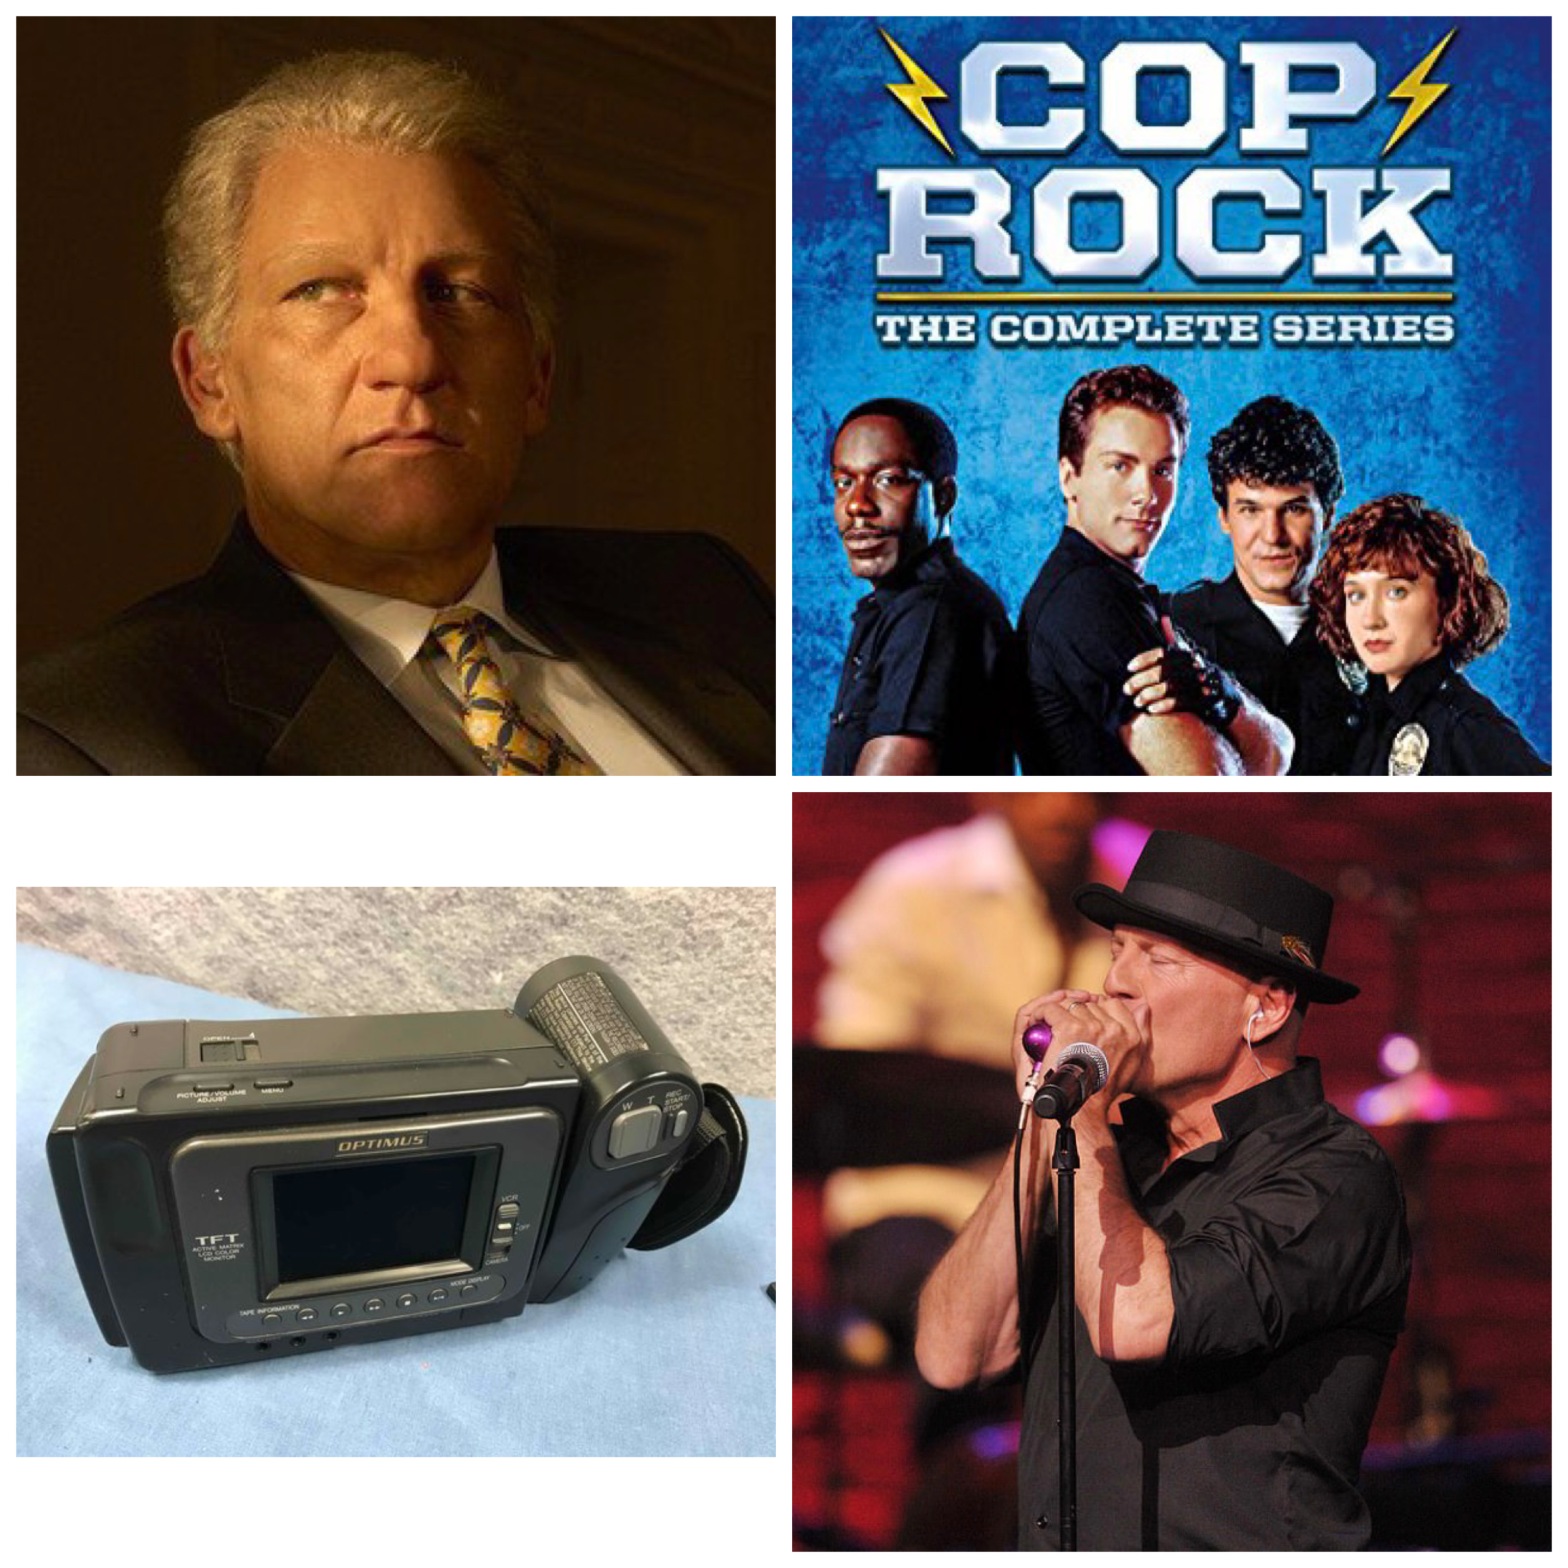 Clive Owen as Bill Clinton, Cop Rock, an Optimus Camcorder, and Bruce Willis playing the harmonica.